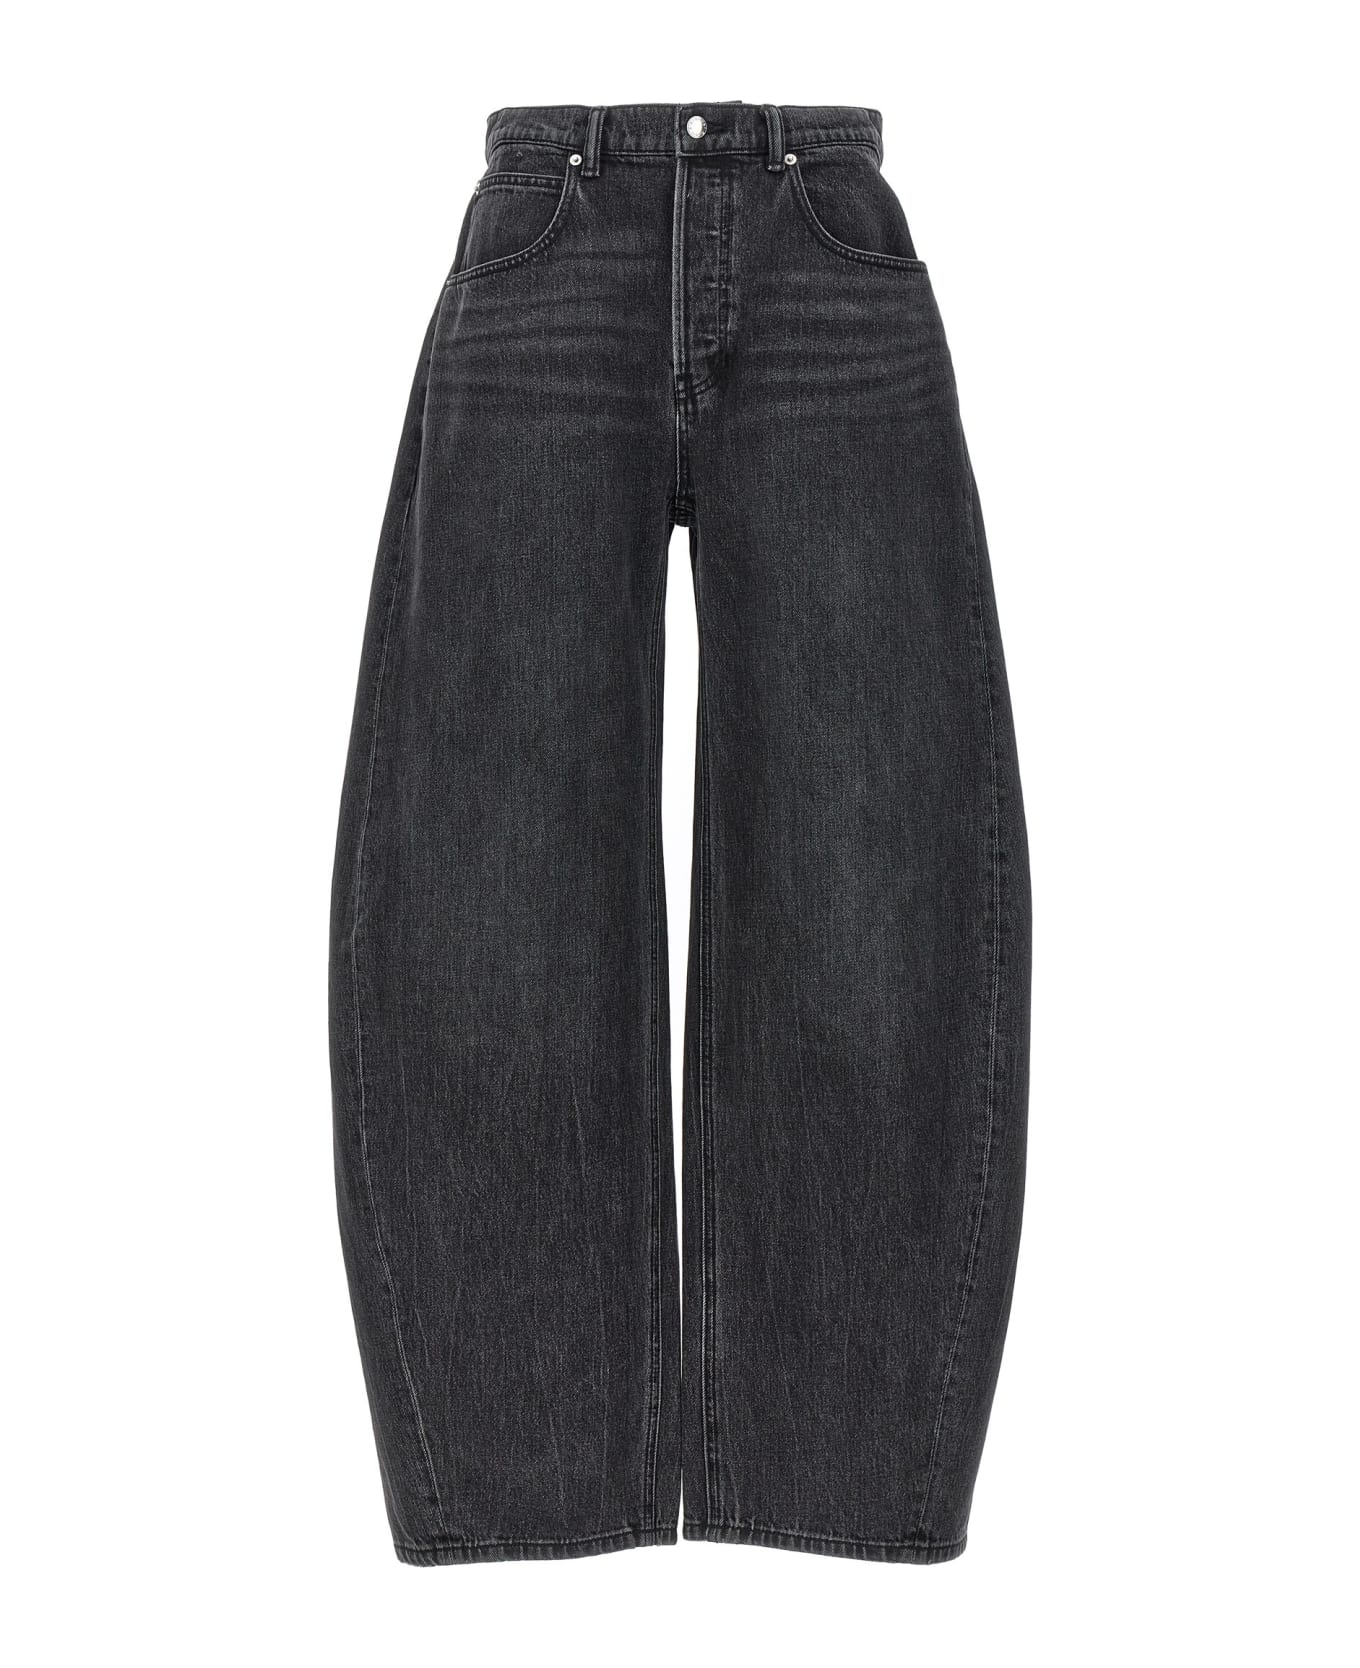 Alexander Wang 'oversized Rounded' Jeans - 031 GREY AGED 